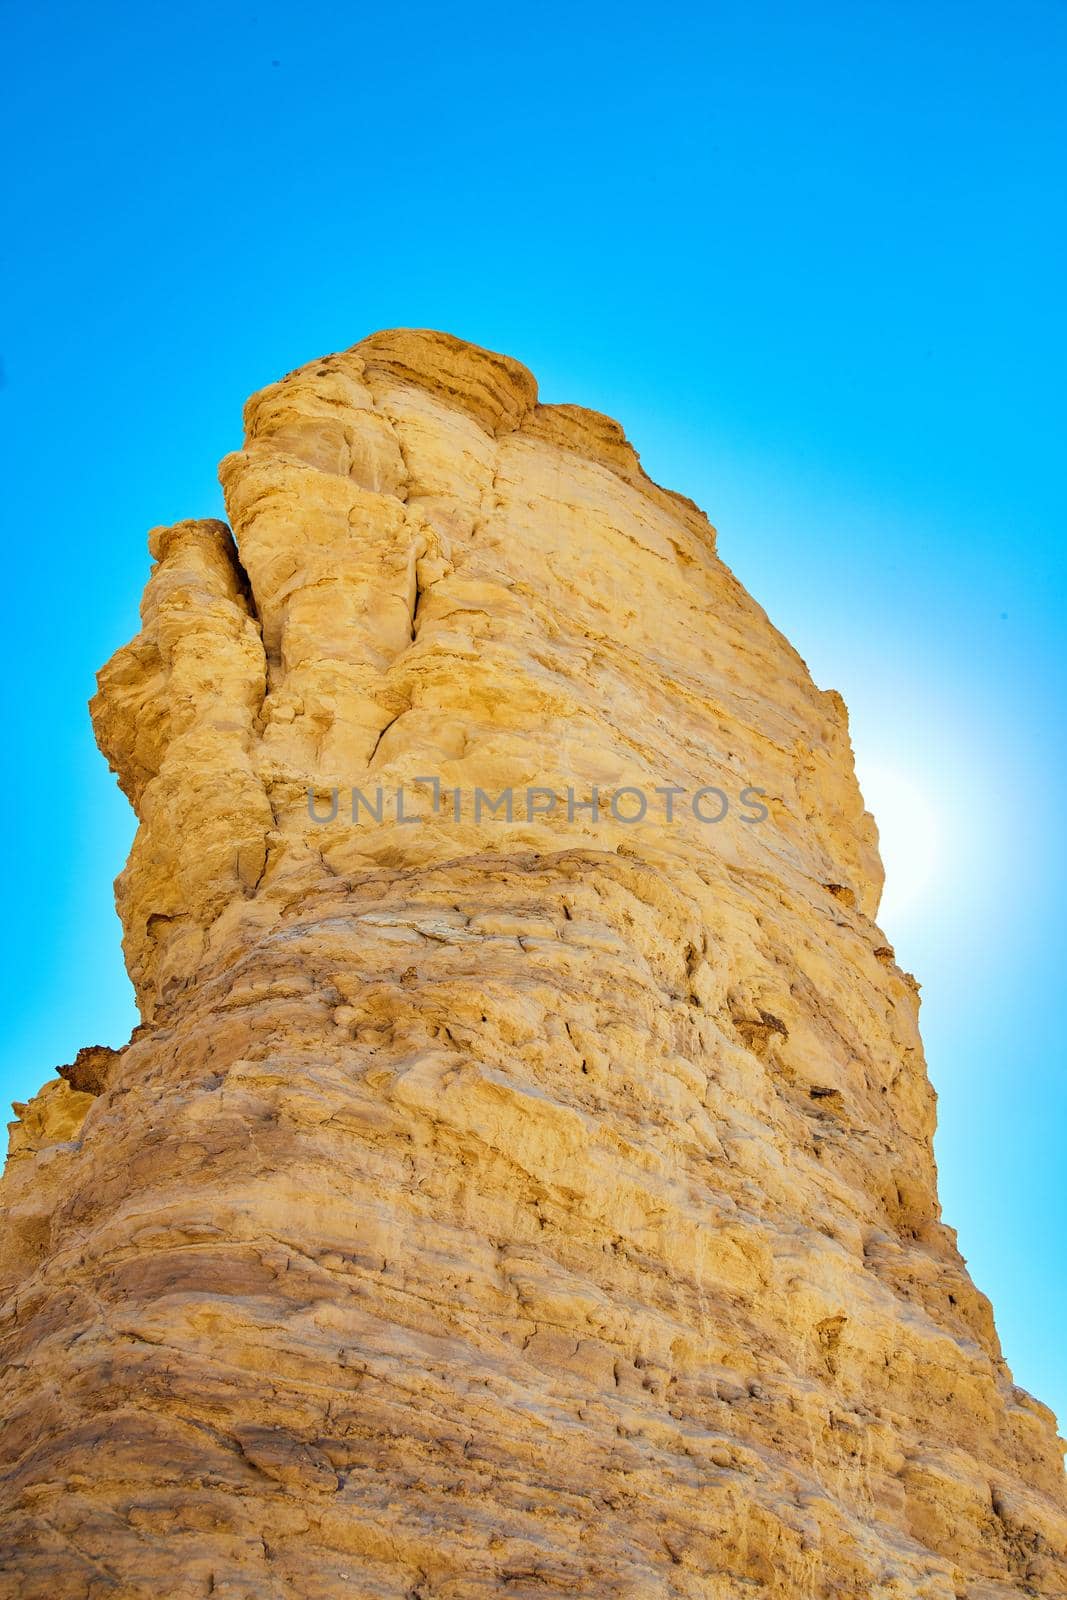 Pillar of white stone blocking sun with vibrant blue sky by njproductions